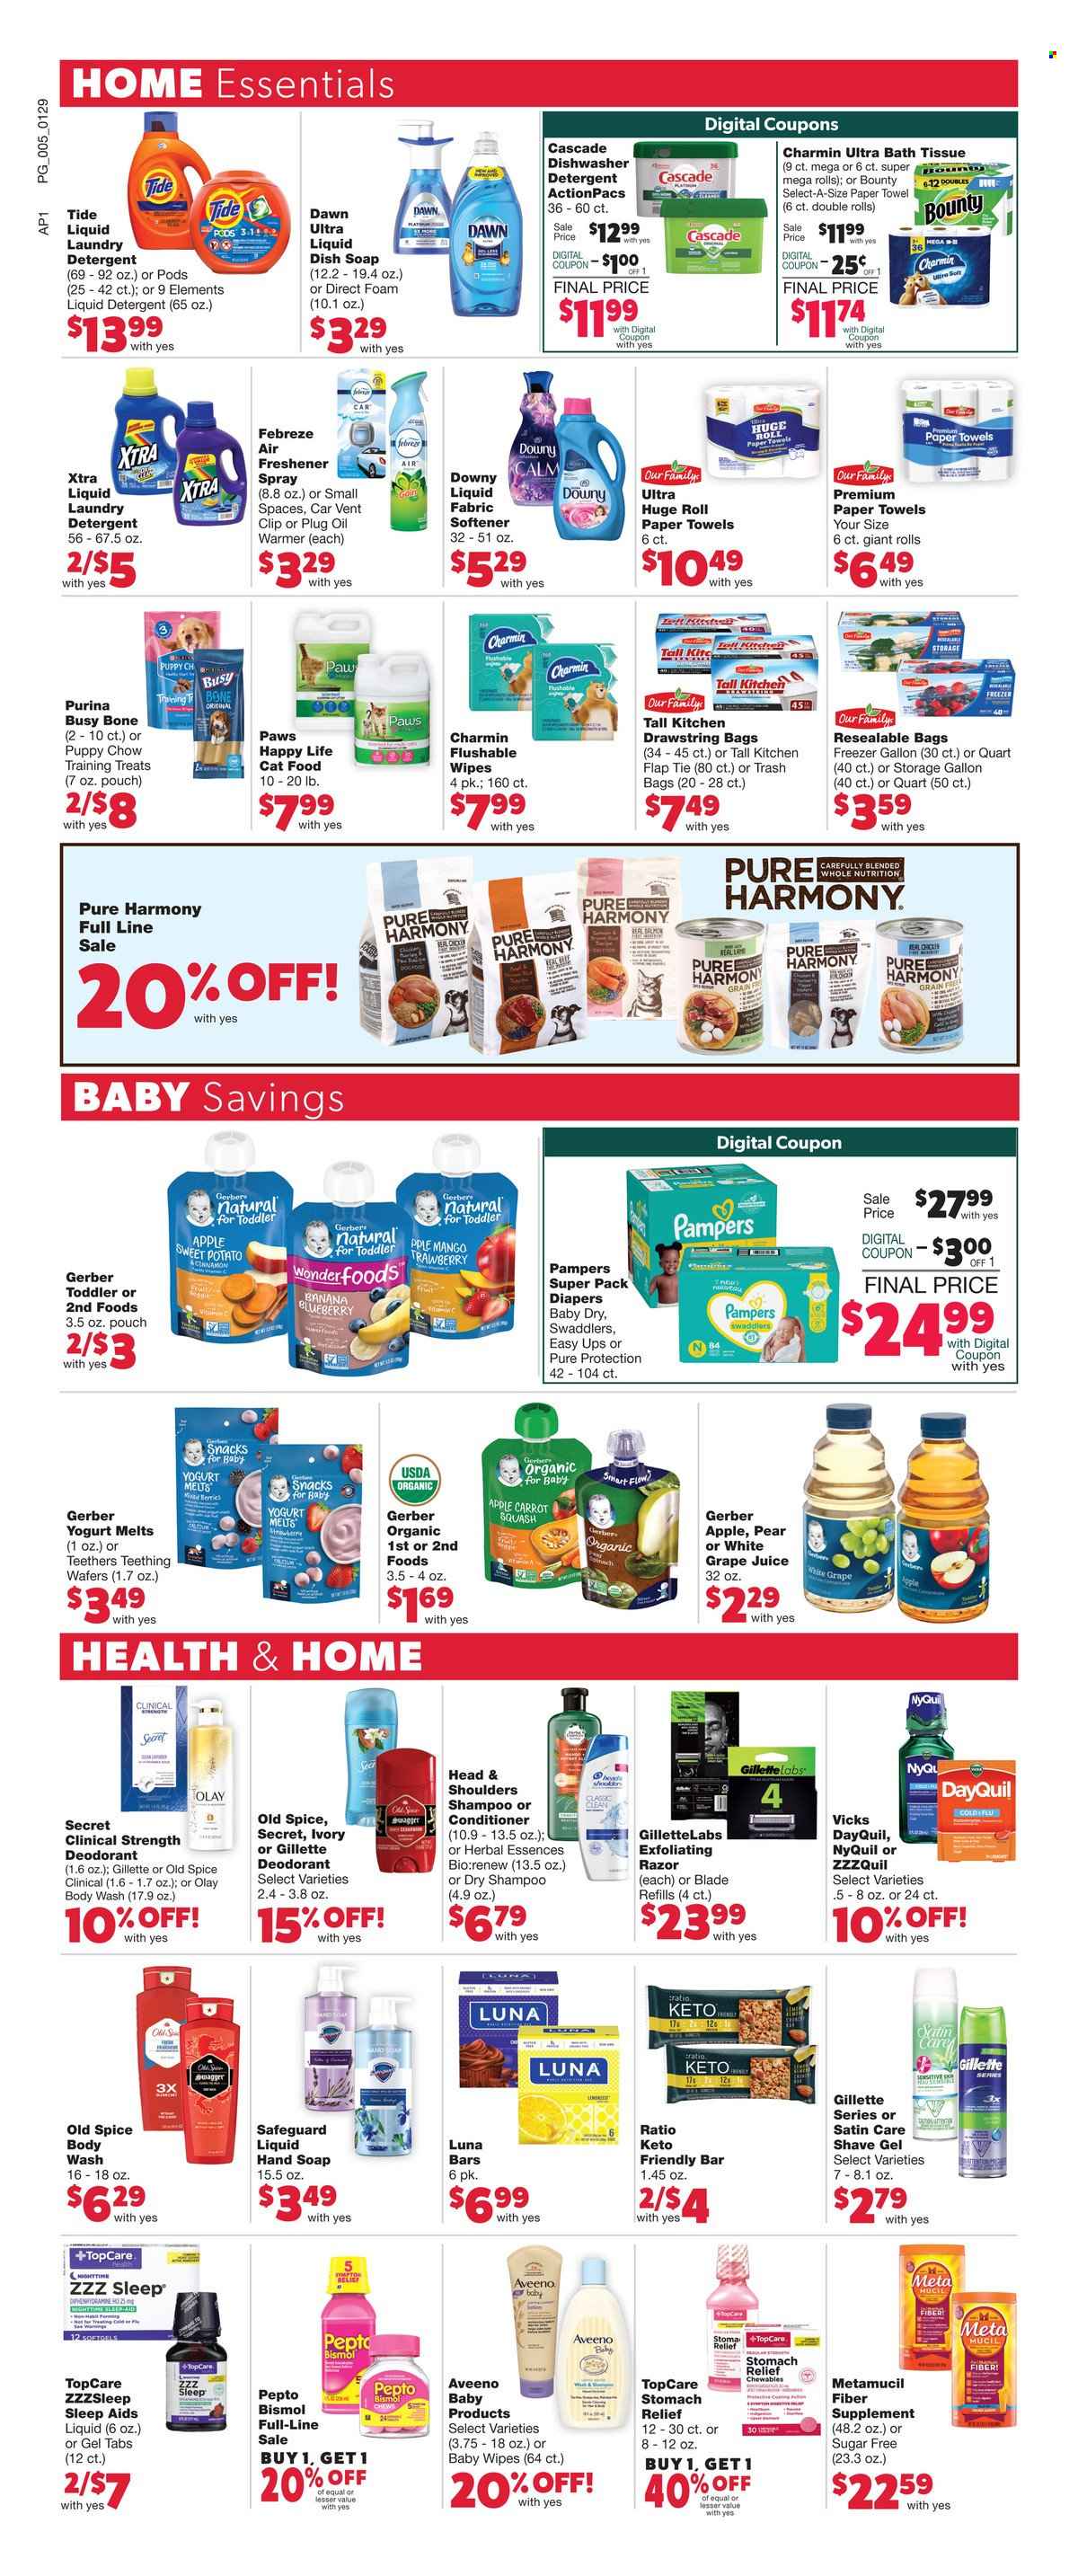 thumbnail - Family Fare Flyer - 01/29/2023 - 02/04/2023 - Sales products - pears, yoghurt, wafers, snack, Bounty, Gerber, spice, cinnamon, oil, juice, wipes, Pampers, baby wipes, nappies, Aveeno, bath tissue, kitchen towels, paper towels, Charmin, detergent, Febreze, Cascade, Tide, fabric softener, liquid detergent, laundry detergent, XTRA, Downy Laundry, body wash, shampoo, hand soap, Old Spice, soap, Olay, conditioner, Head & Shoulders, Herbal Essences, anti-perspirant, deodorant, Gillette, razor, shave gel, Vicks, trash bags, freshener spray, DayQuil, vitamin c, ZzzQuil, NyQuil, Metamucil. Page 5.